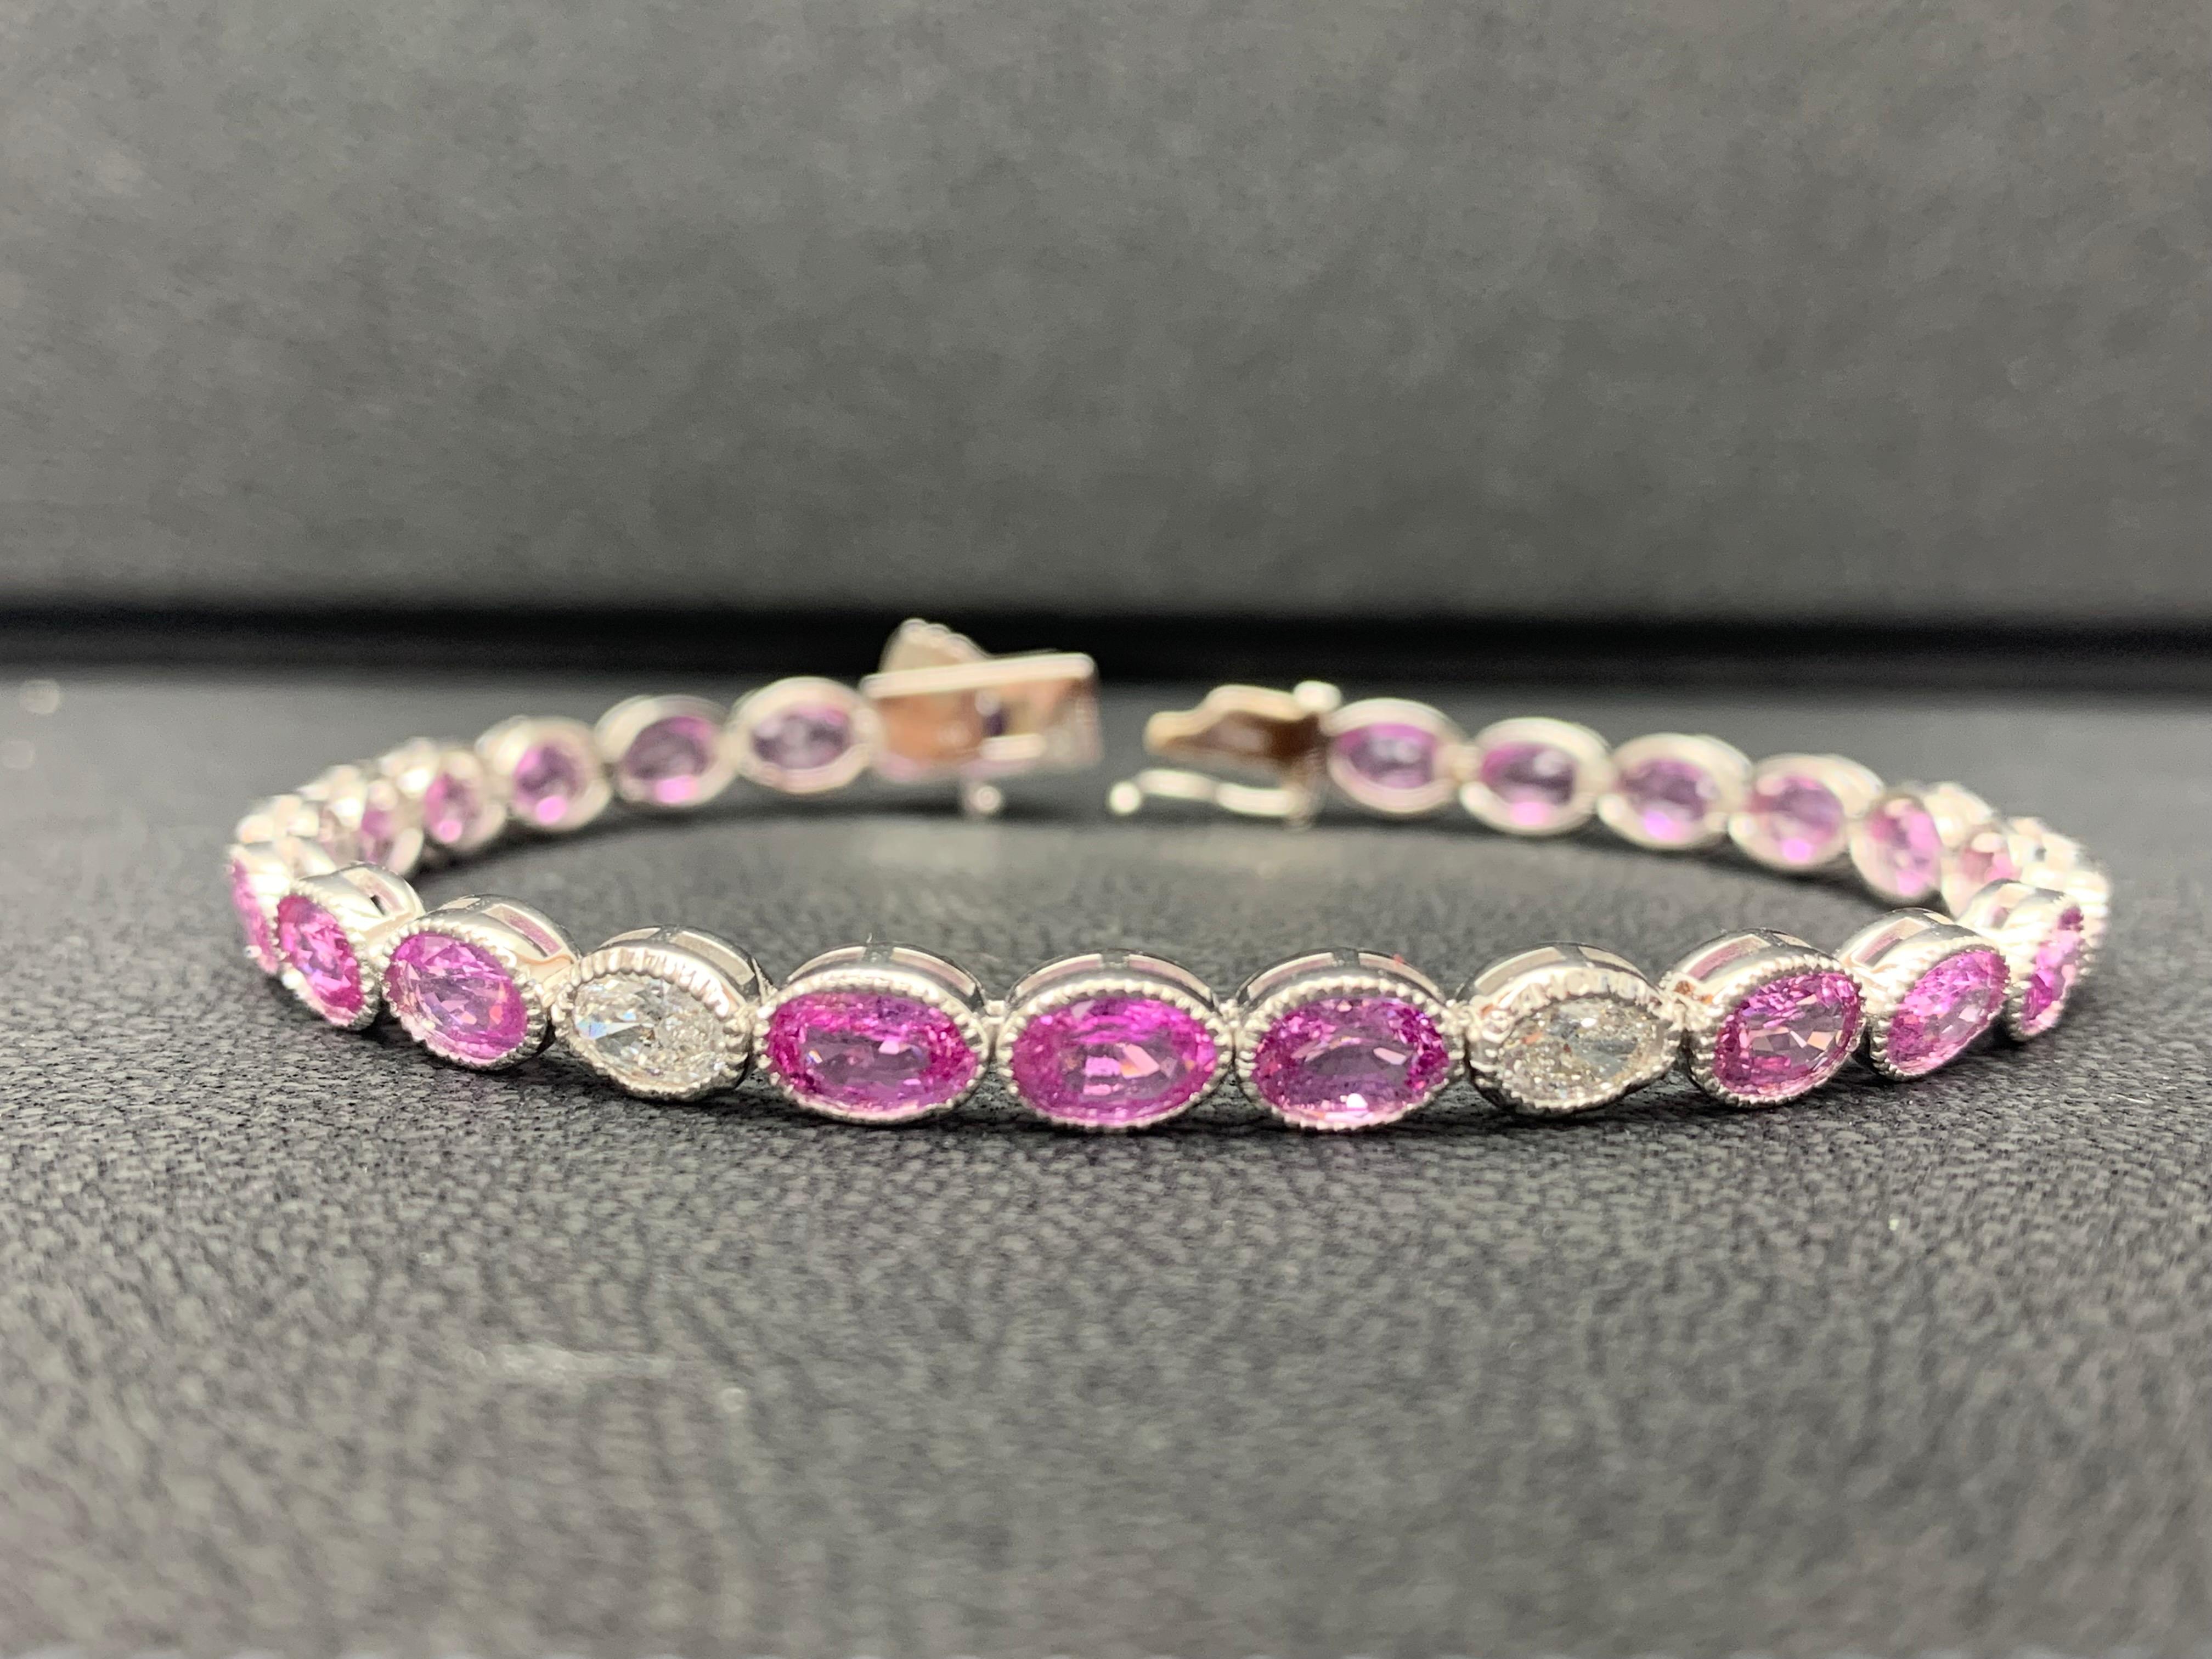 A classic and simple tennis bracelet style featuring 23 Oval cut brilliant pink sapphire weighing 12.62 carats and 2 oval cut brilliant diamonds weighing 0.65 carats total. Set in a polished 14k White gold mounting. 

All diamonds are GH color SI1